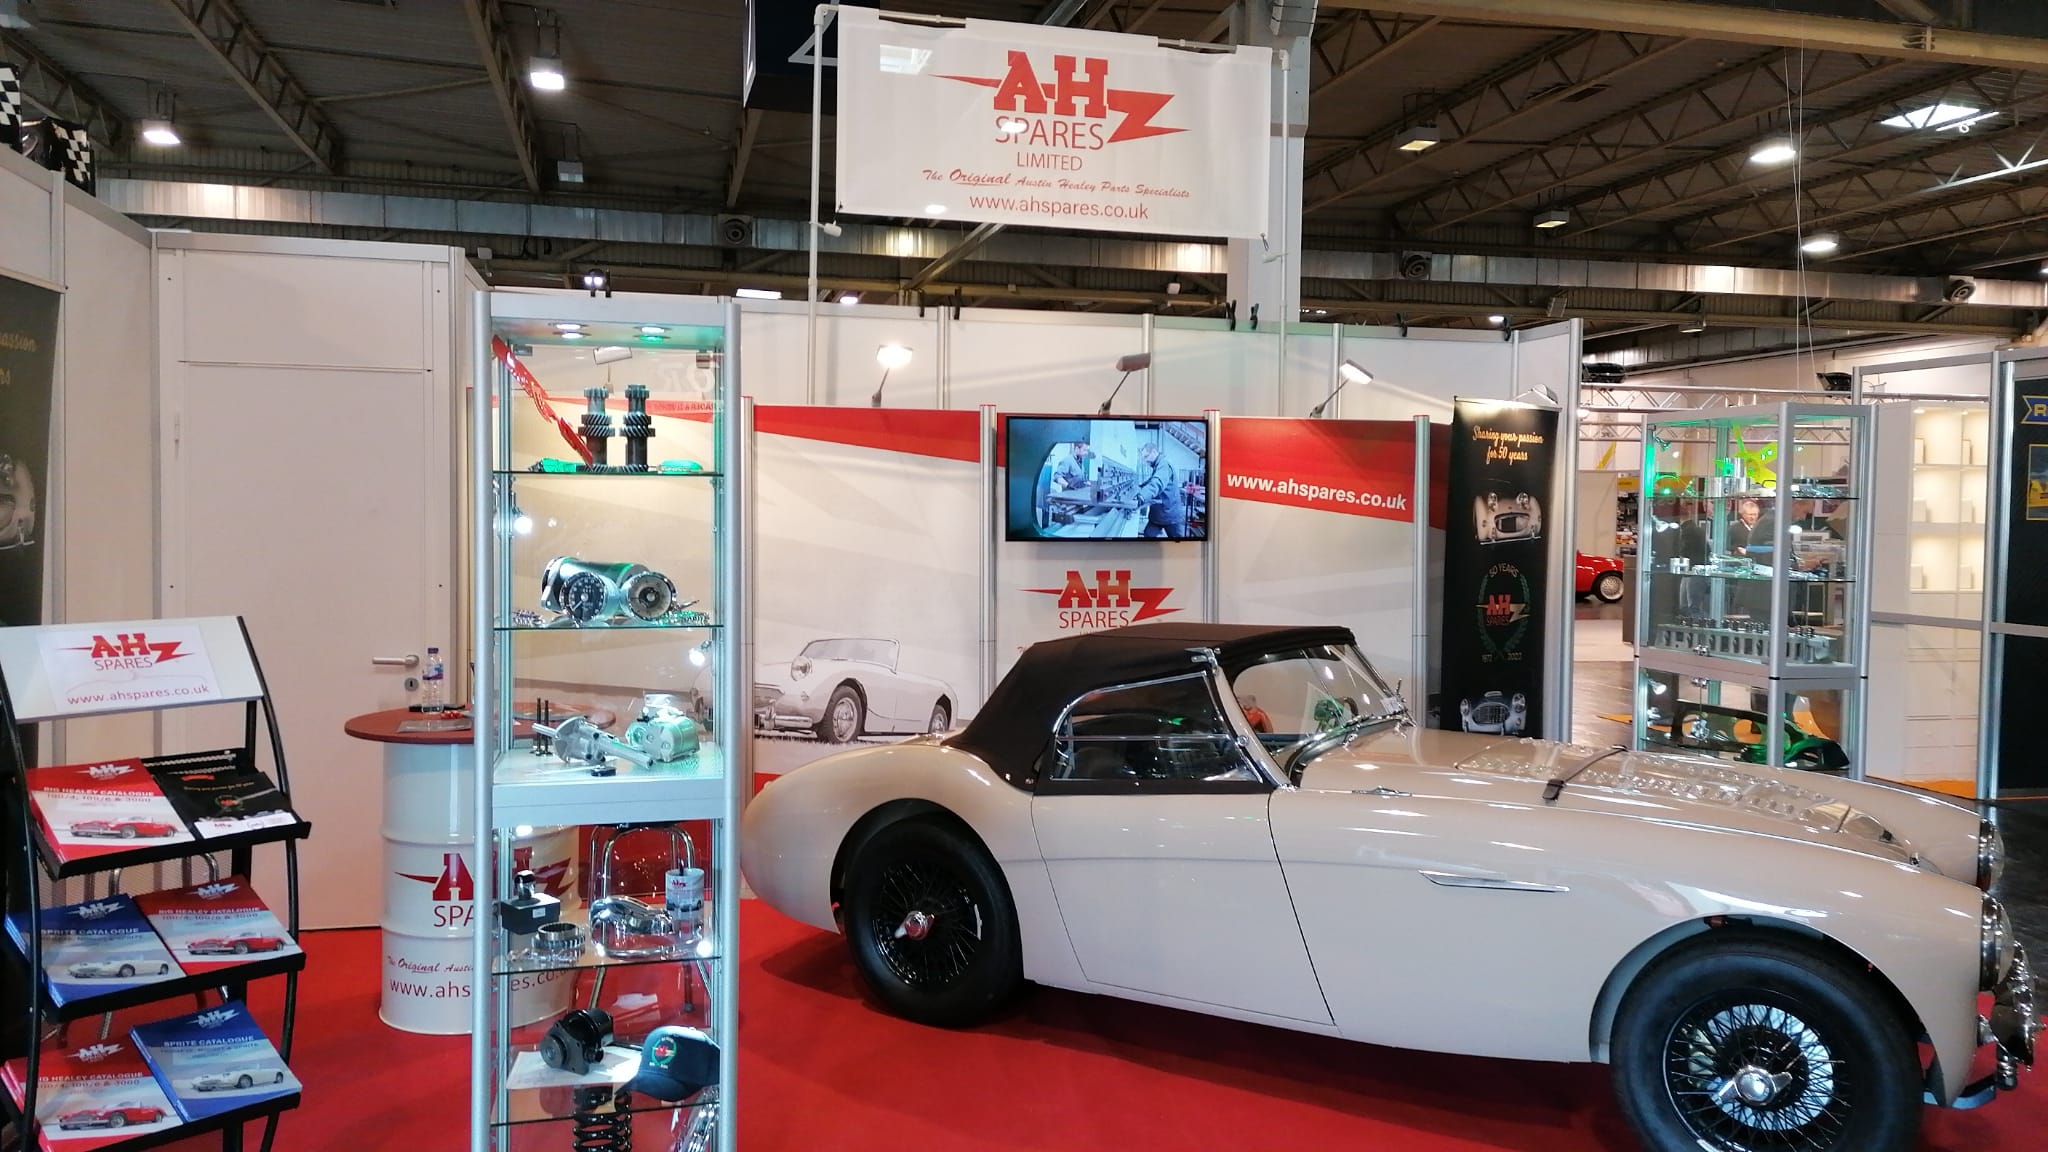 A H Spares stand at Techno Classica 2022